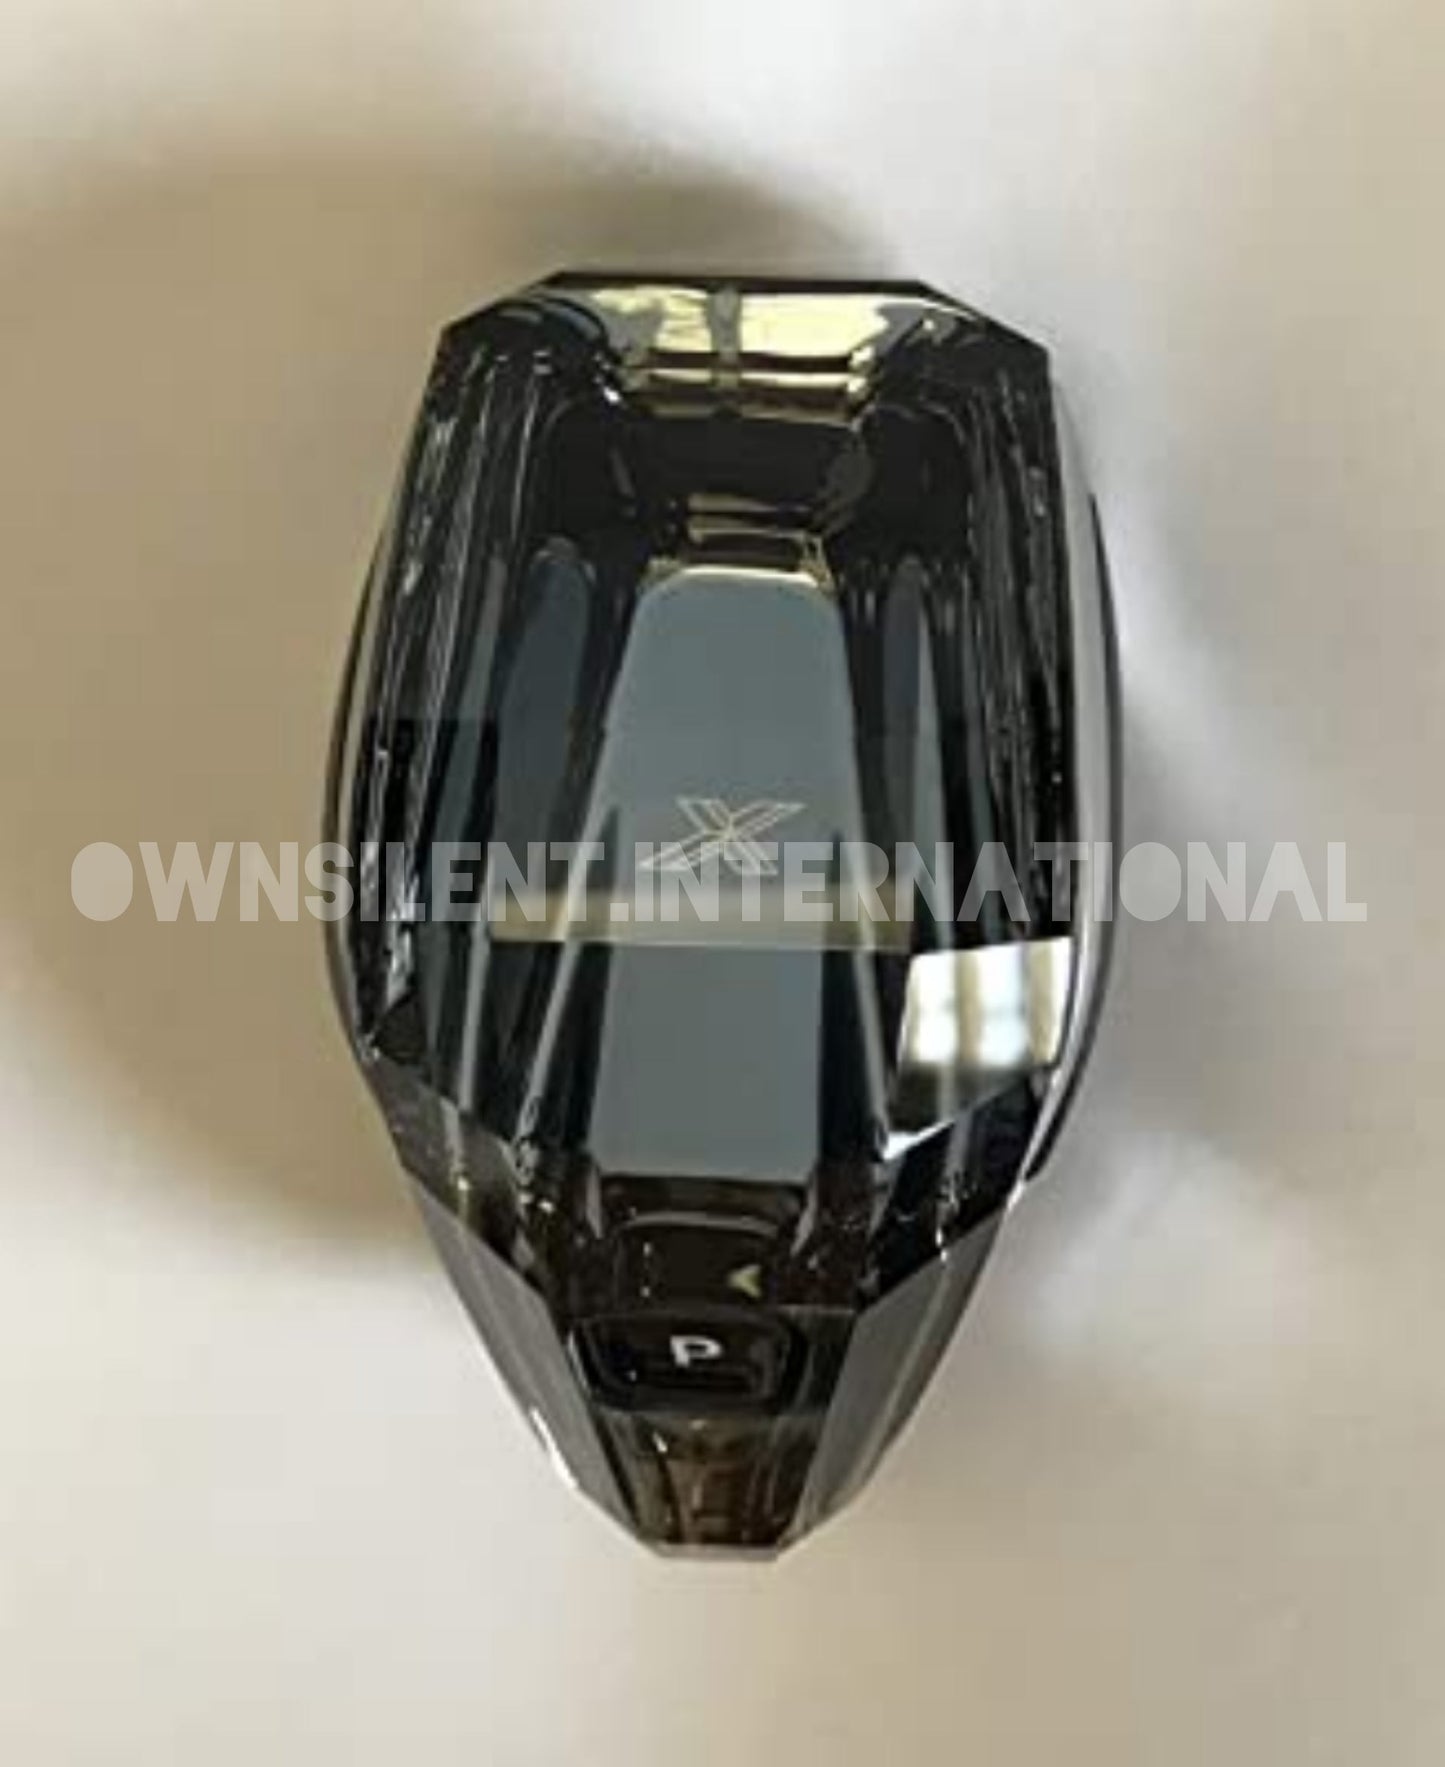 BMW Crystal Series - Gear Shift Knob Compatible with BMW X3, X4, X5, X6 and X7